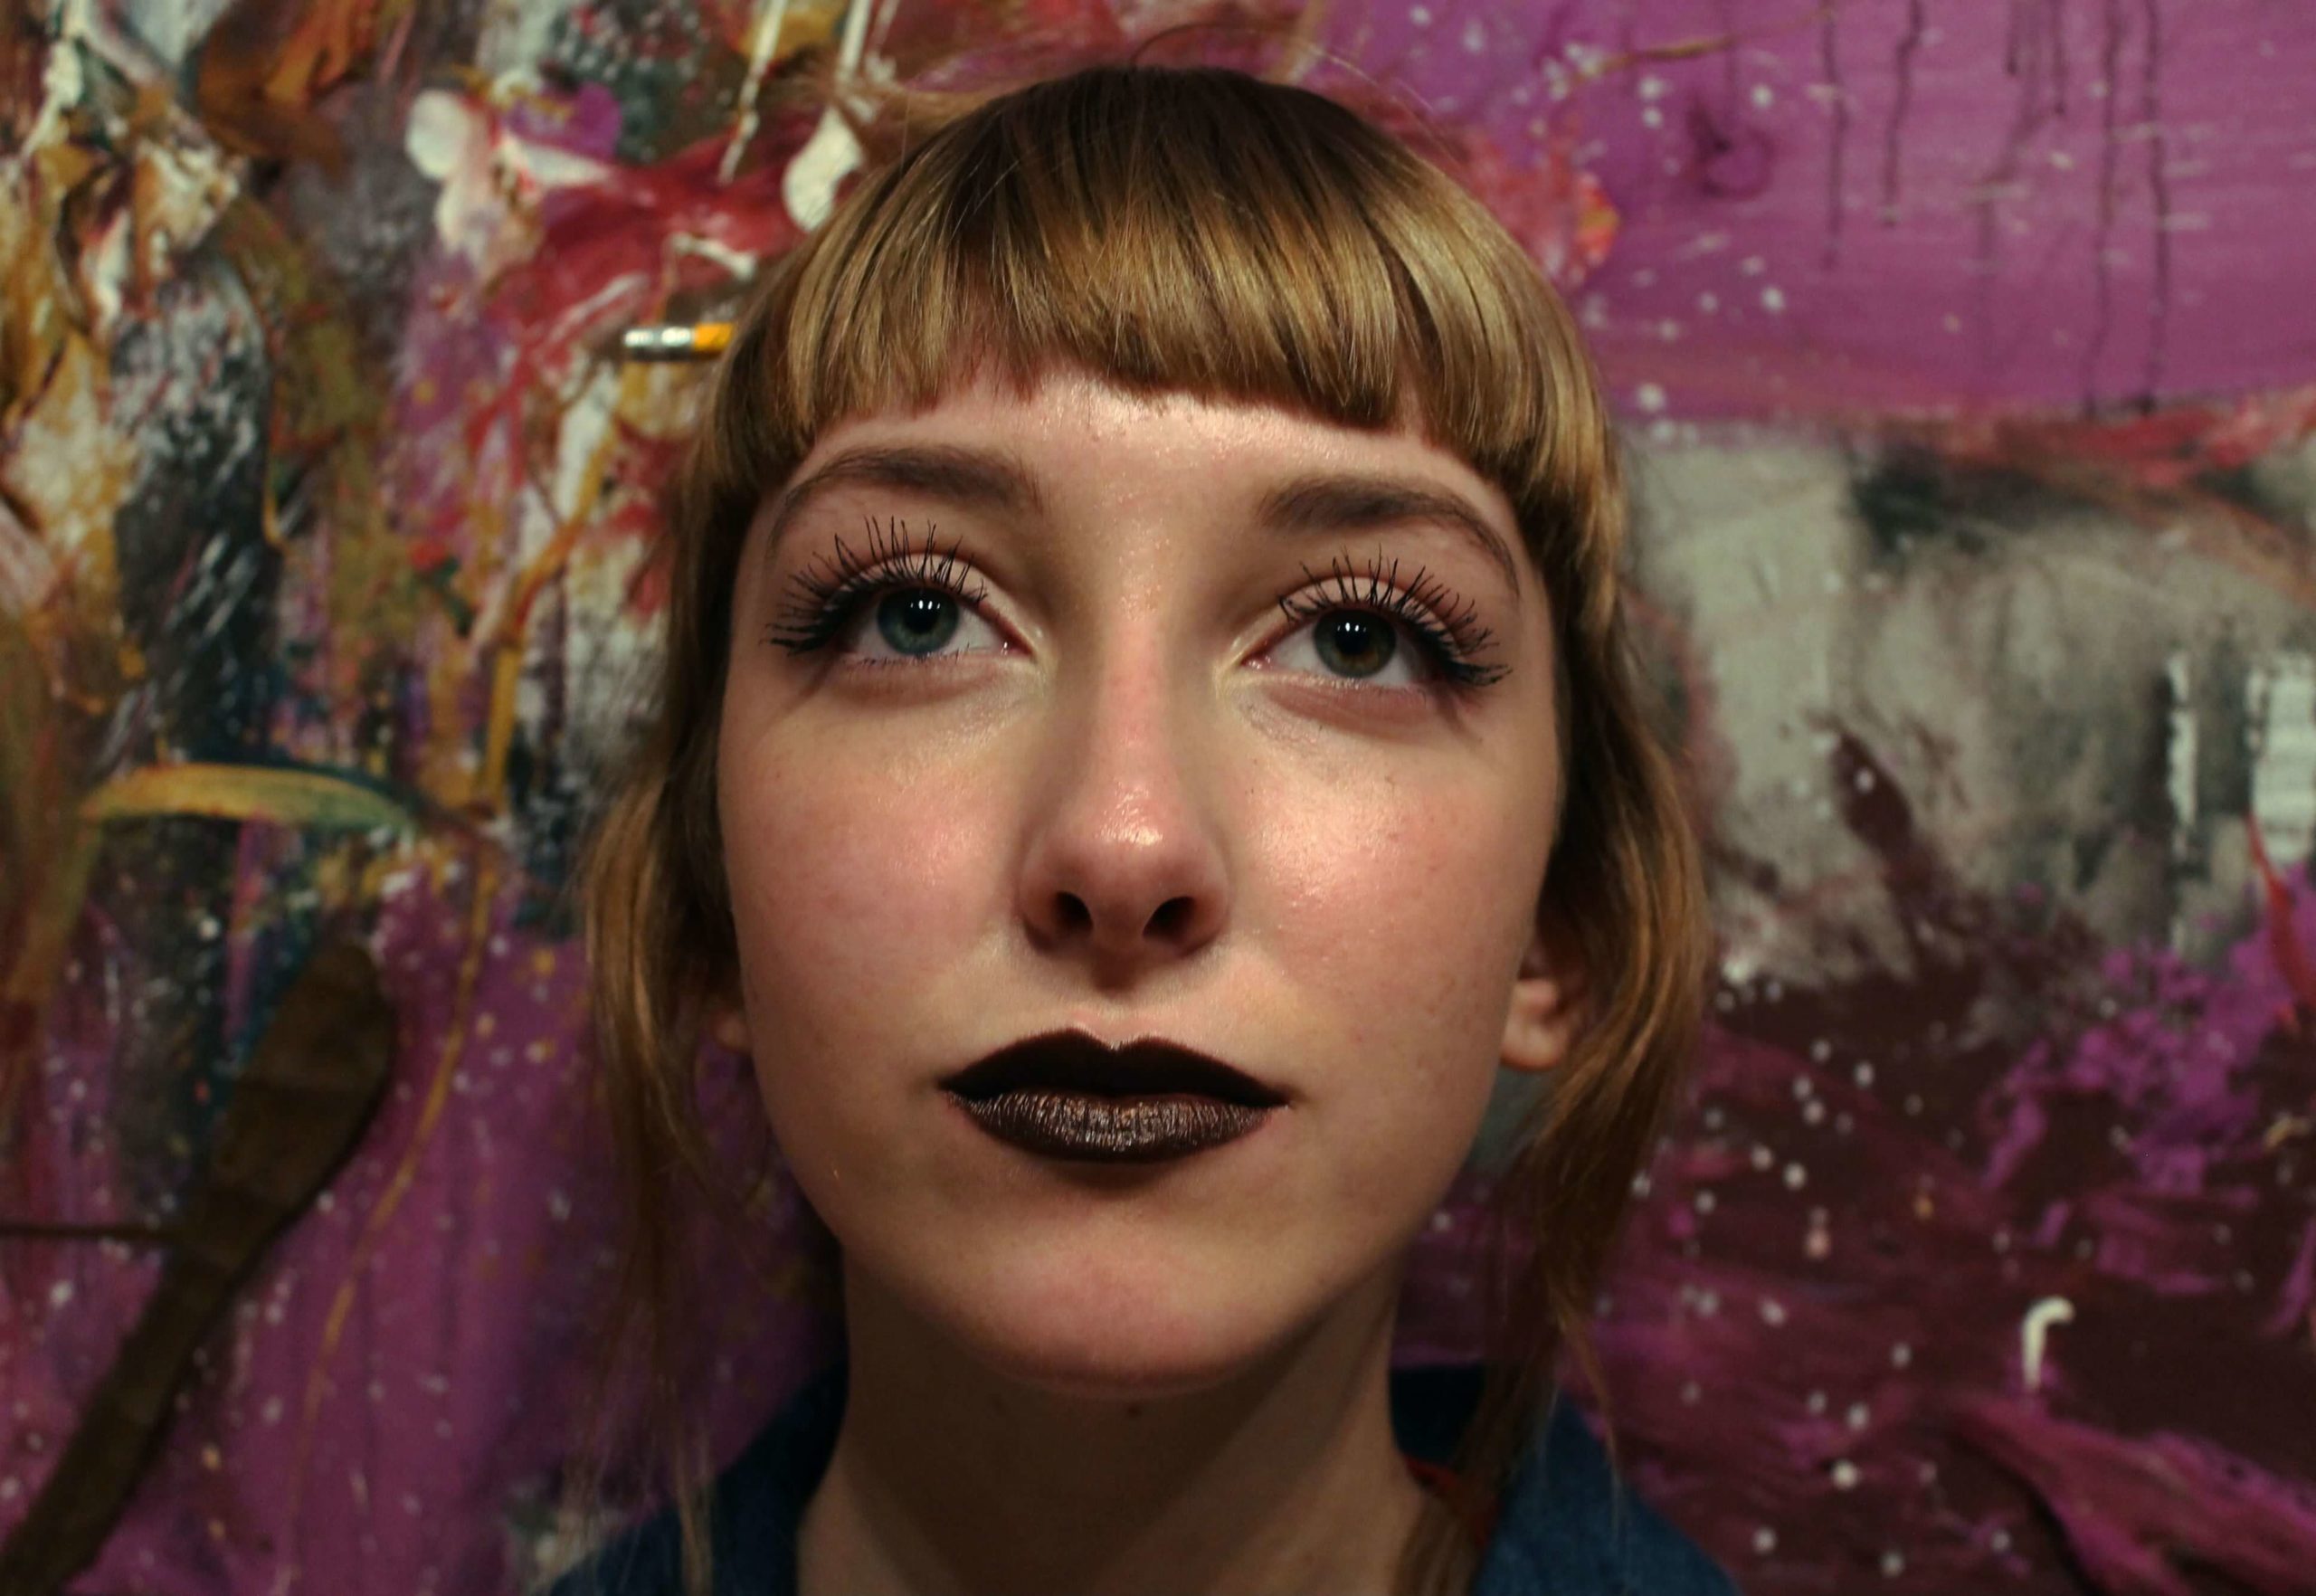 Young person with dark lipstick and blond hair in front of a painting looking at the camera